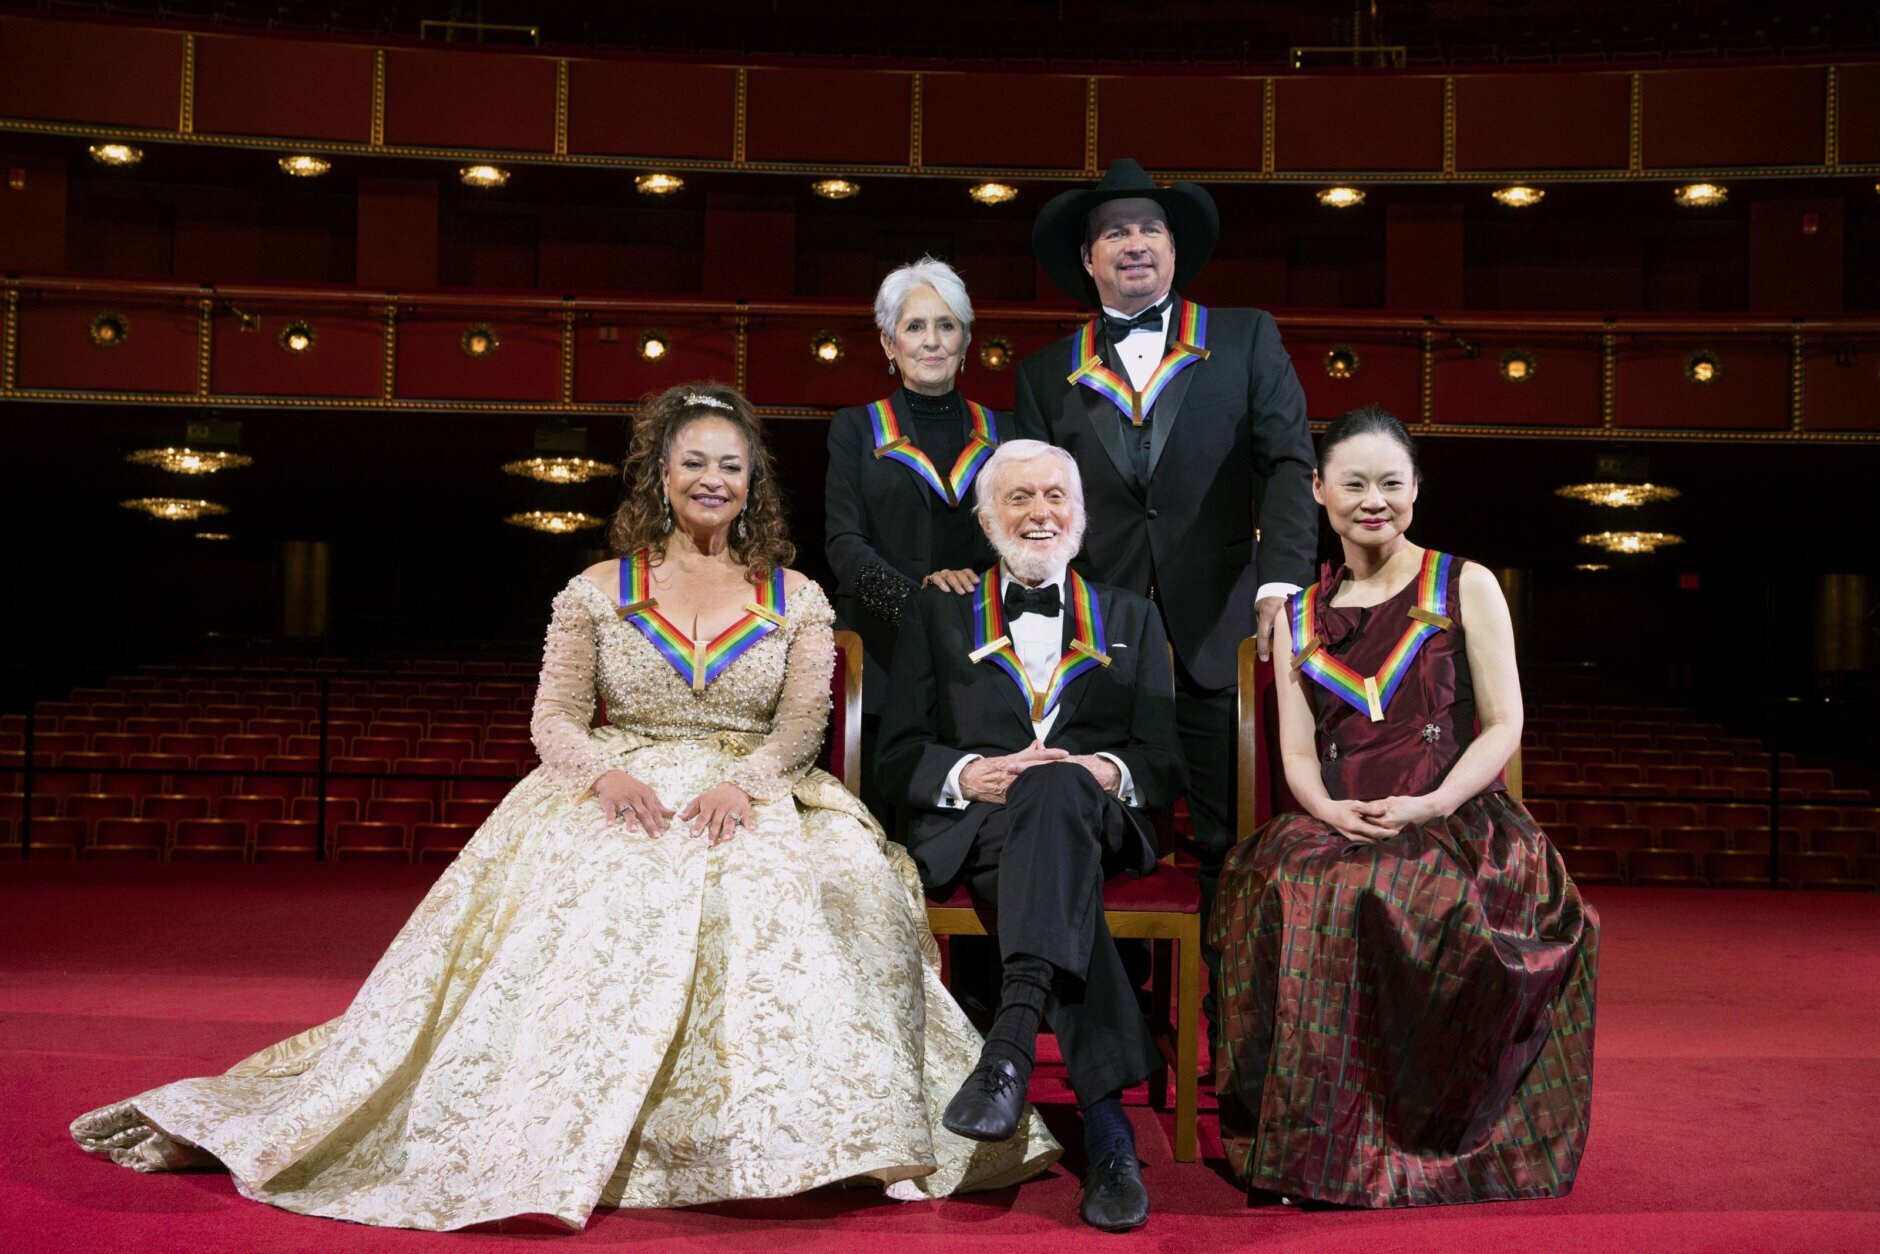 2020 Kennedy Center honorees, from left, choreographer, and actress Debbie Allen; singer-songwriter and activist Joan Baez; actor Dick Van Dyke; country singer-songwriter Garth Brooks; and violinist Midori pose for a group photos at the 43nd Annual Kennedy Center Honors at The Kennedy Center on Friday, May 21, 2021, in Washington. (AP Photo/Kevin Wolf)